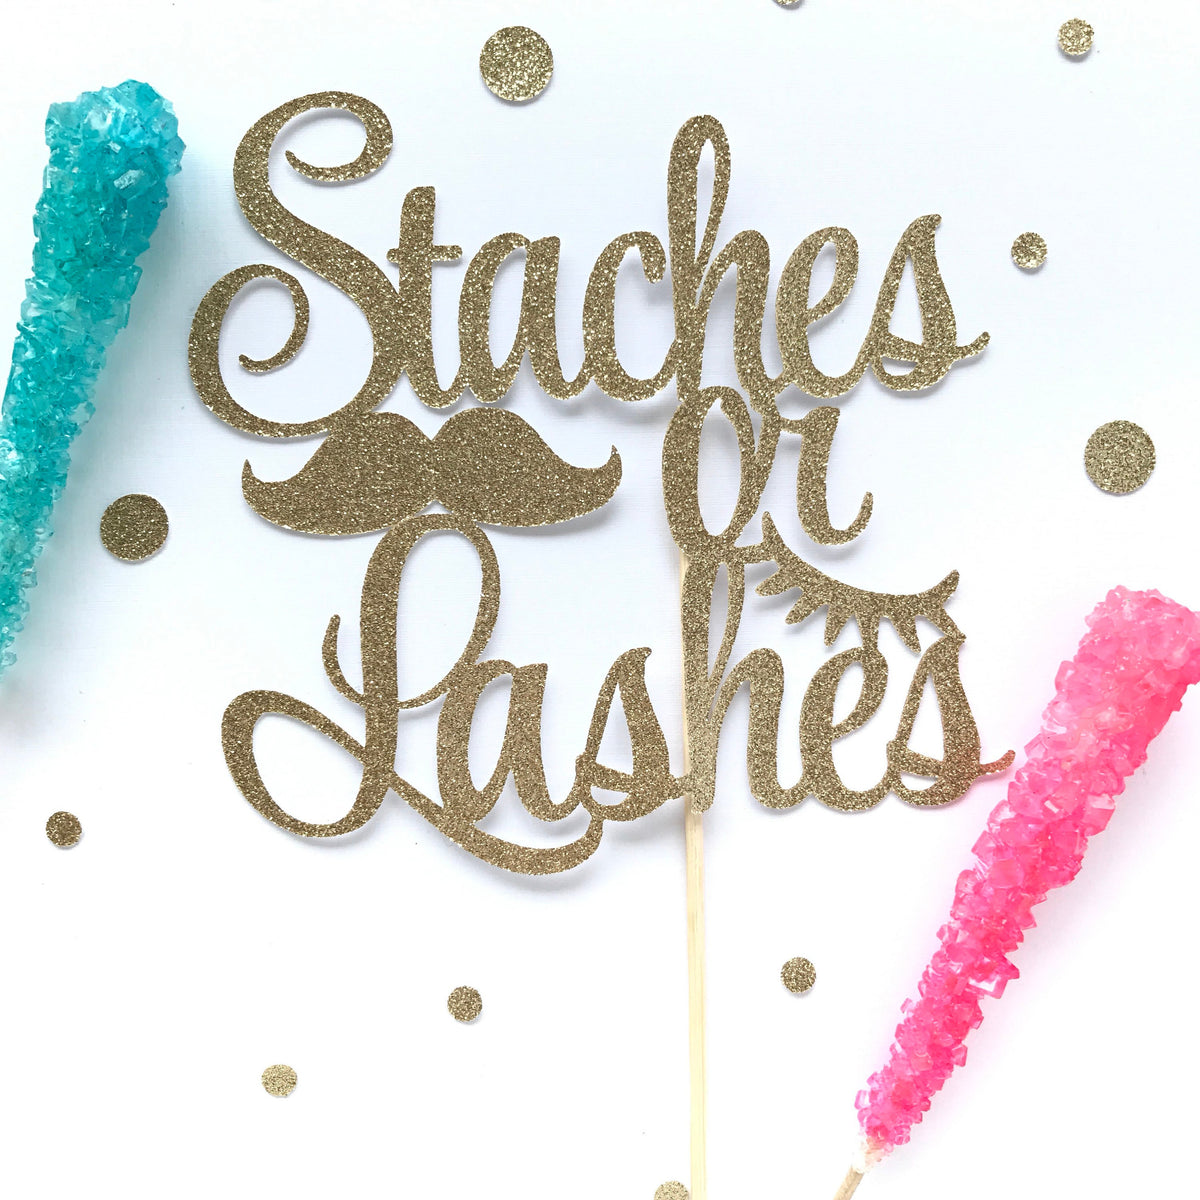  Staches or Lashes Cake Topper - Gender Reveal Party